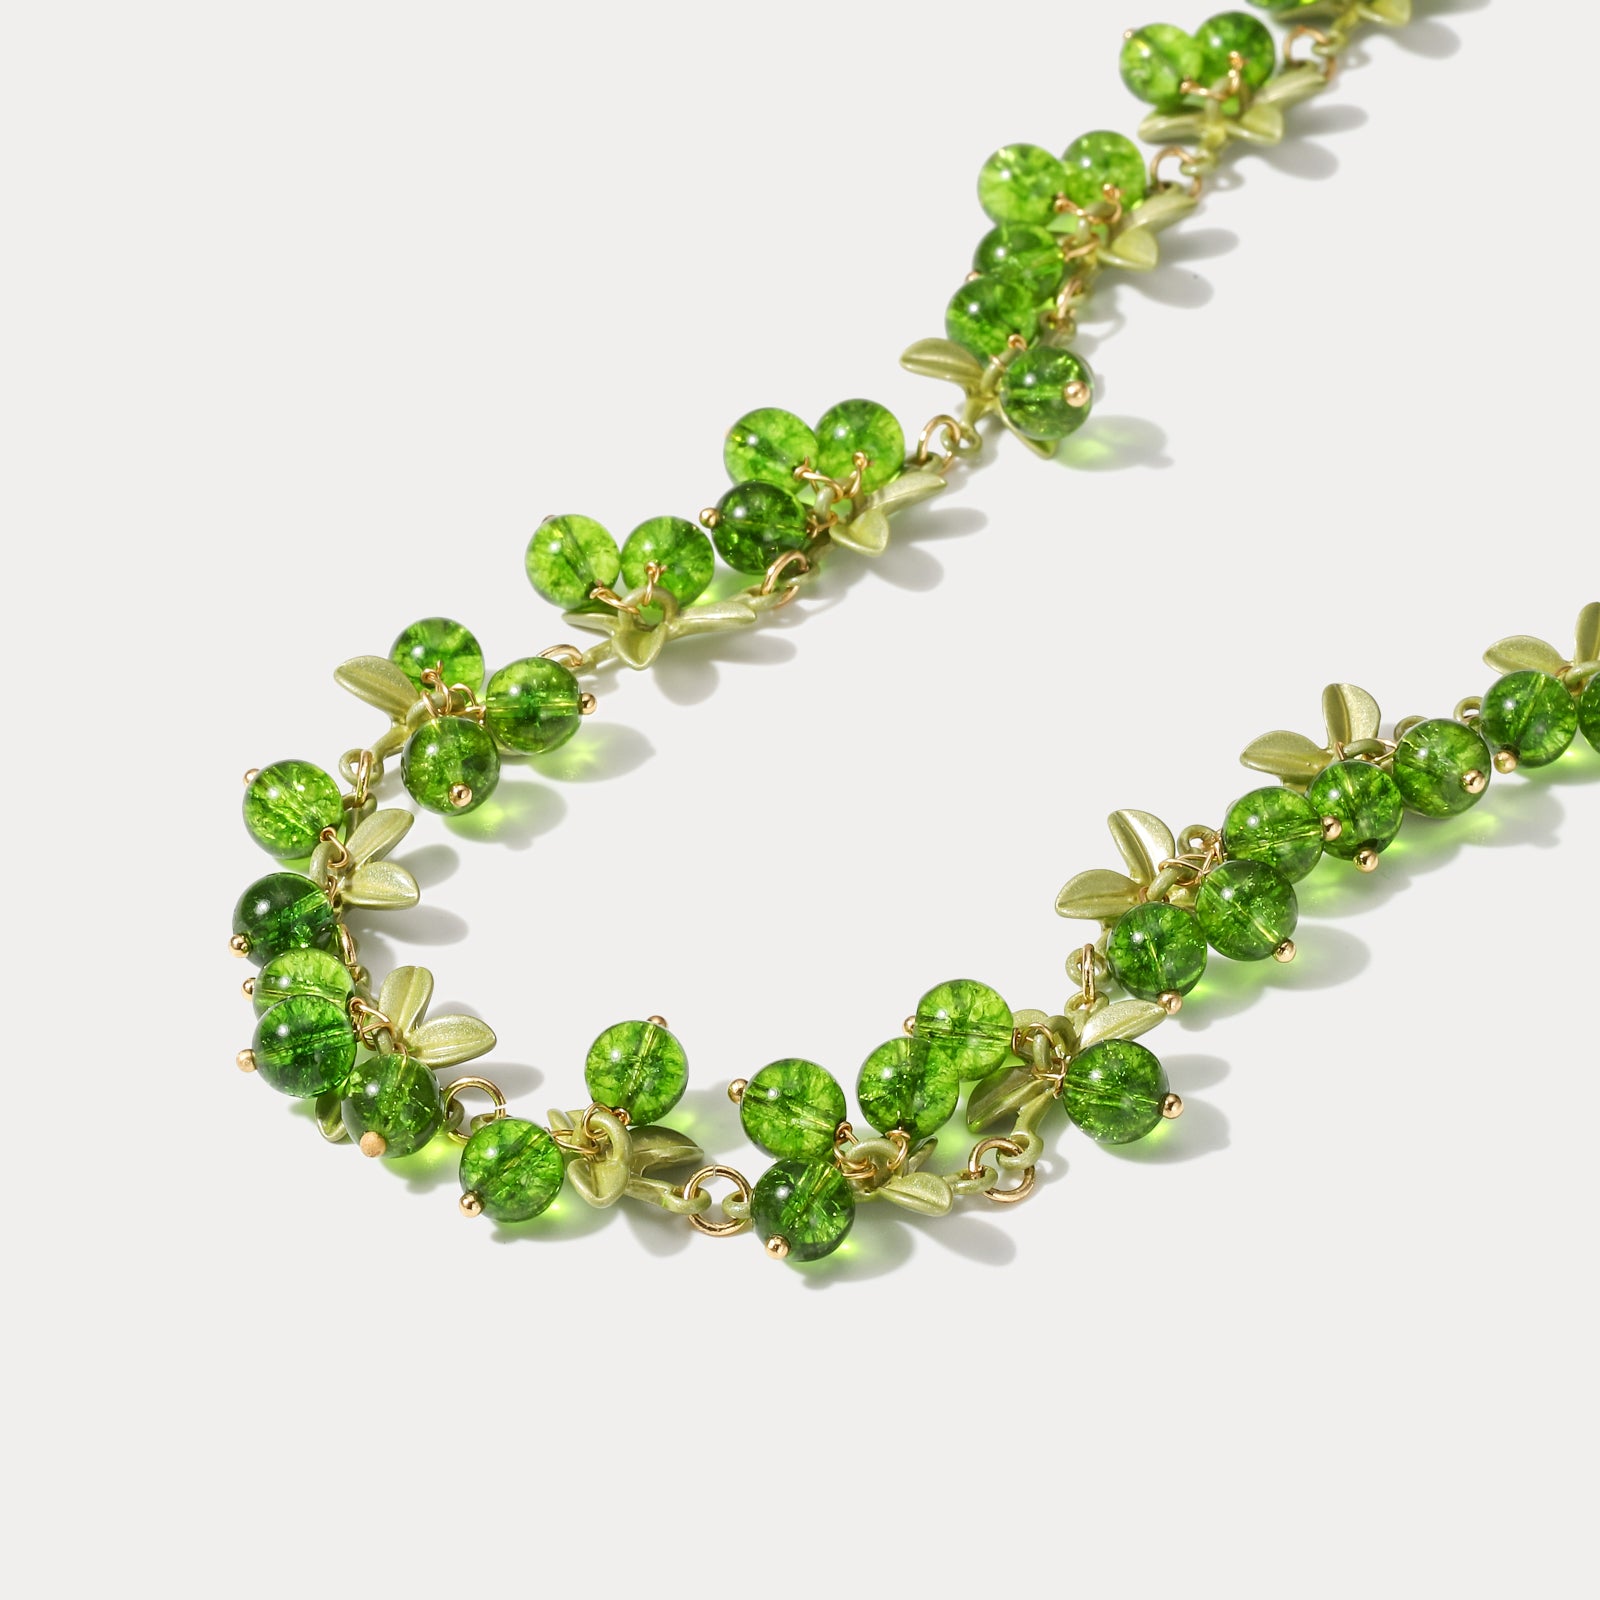 Green Wild Berry Necklace